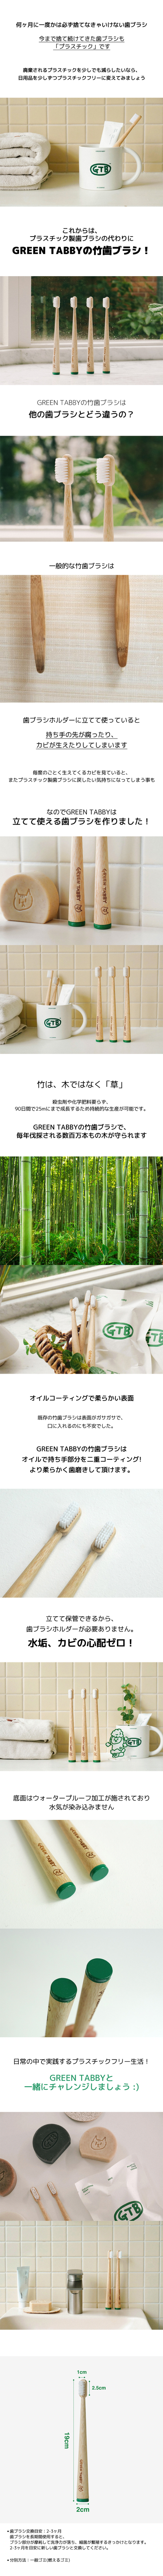 stand up bamboo toothbrush